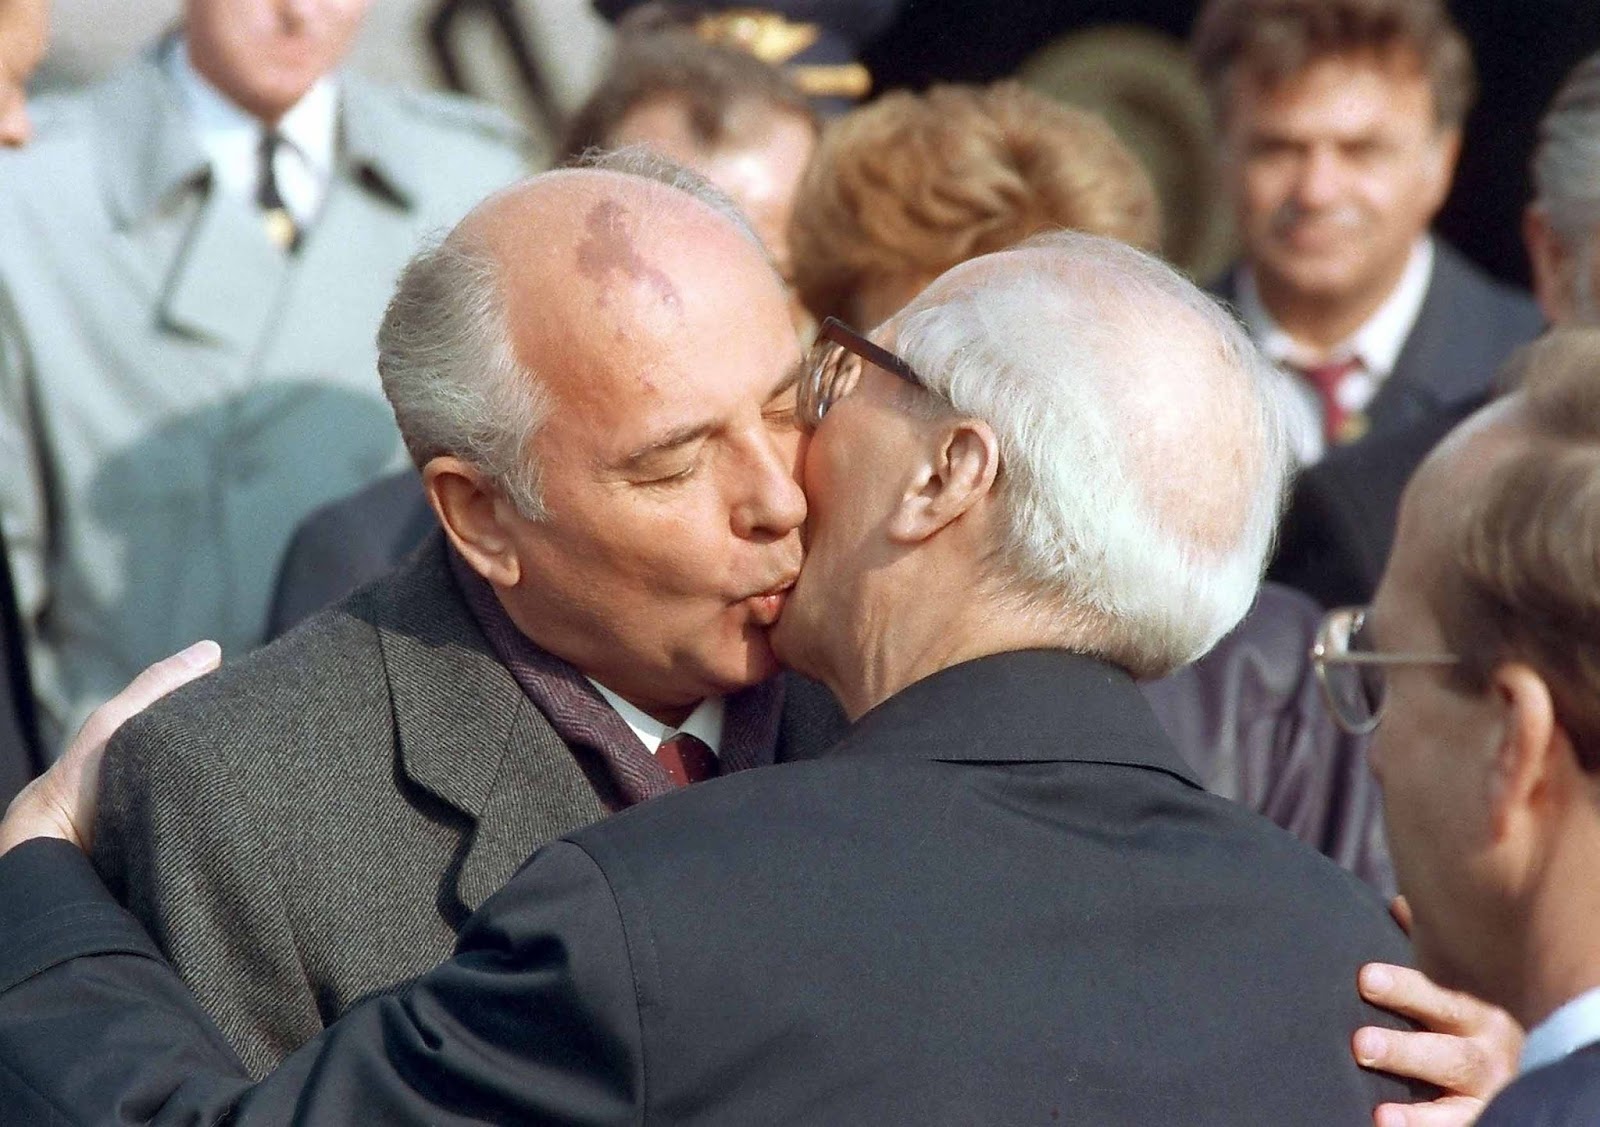 Gorbachev and Honecker sharing another socialist kiss in 1989. Picture taken during the celebration of the 40th anniversary of the German Democratic Republic's creation in East Berlin.